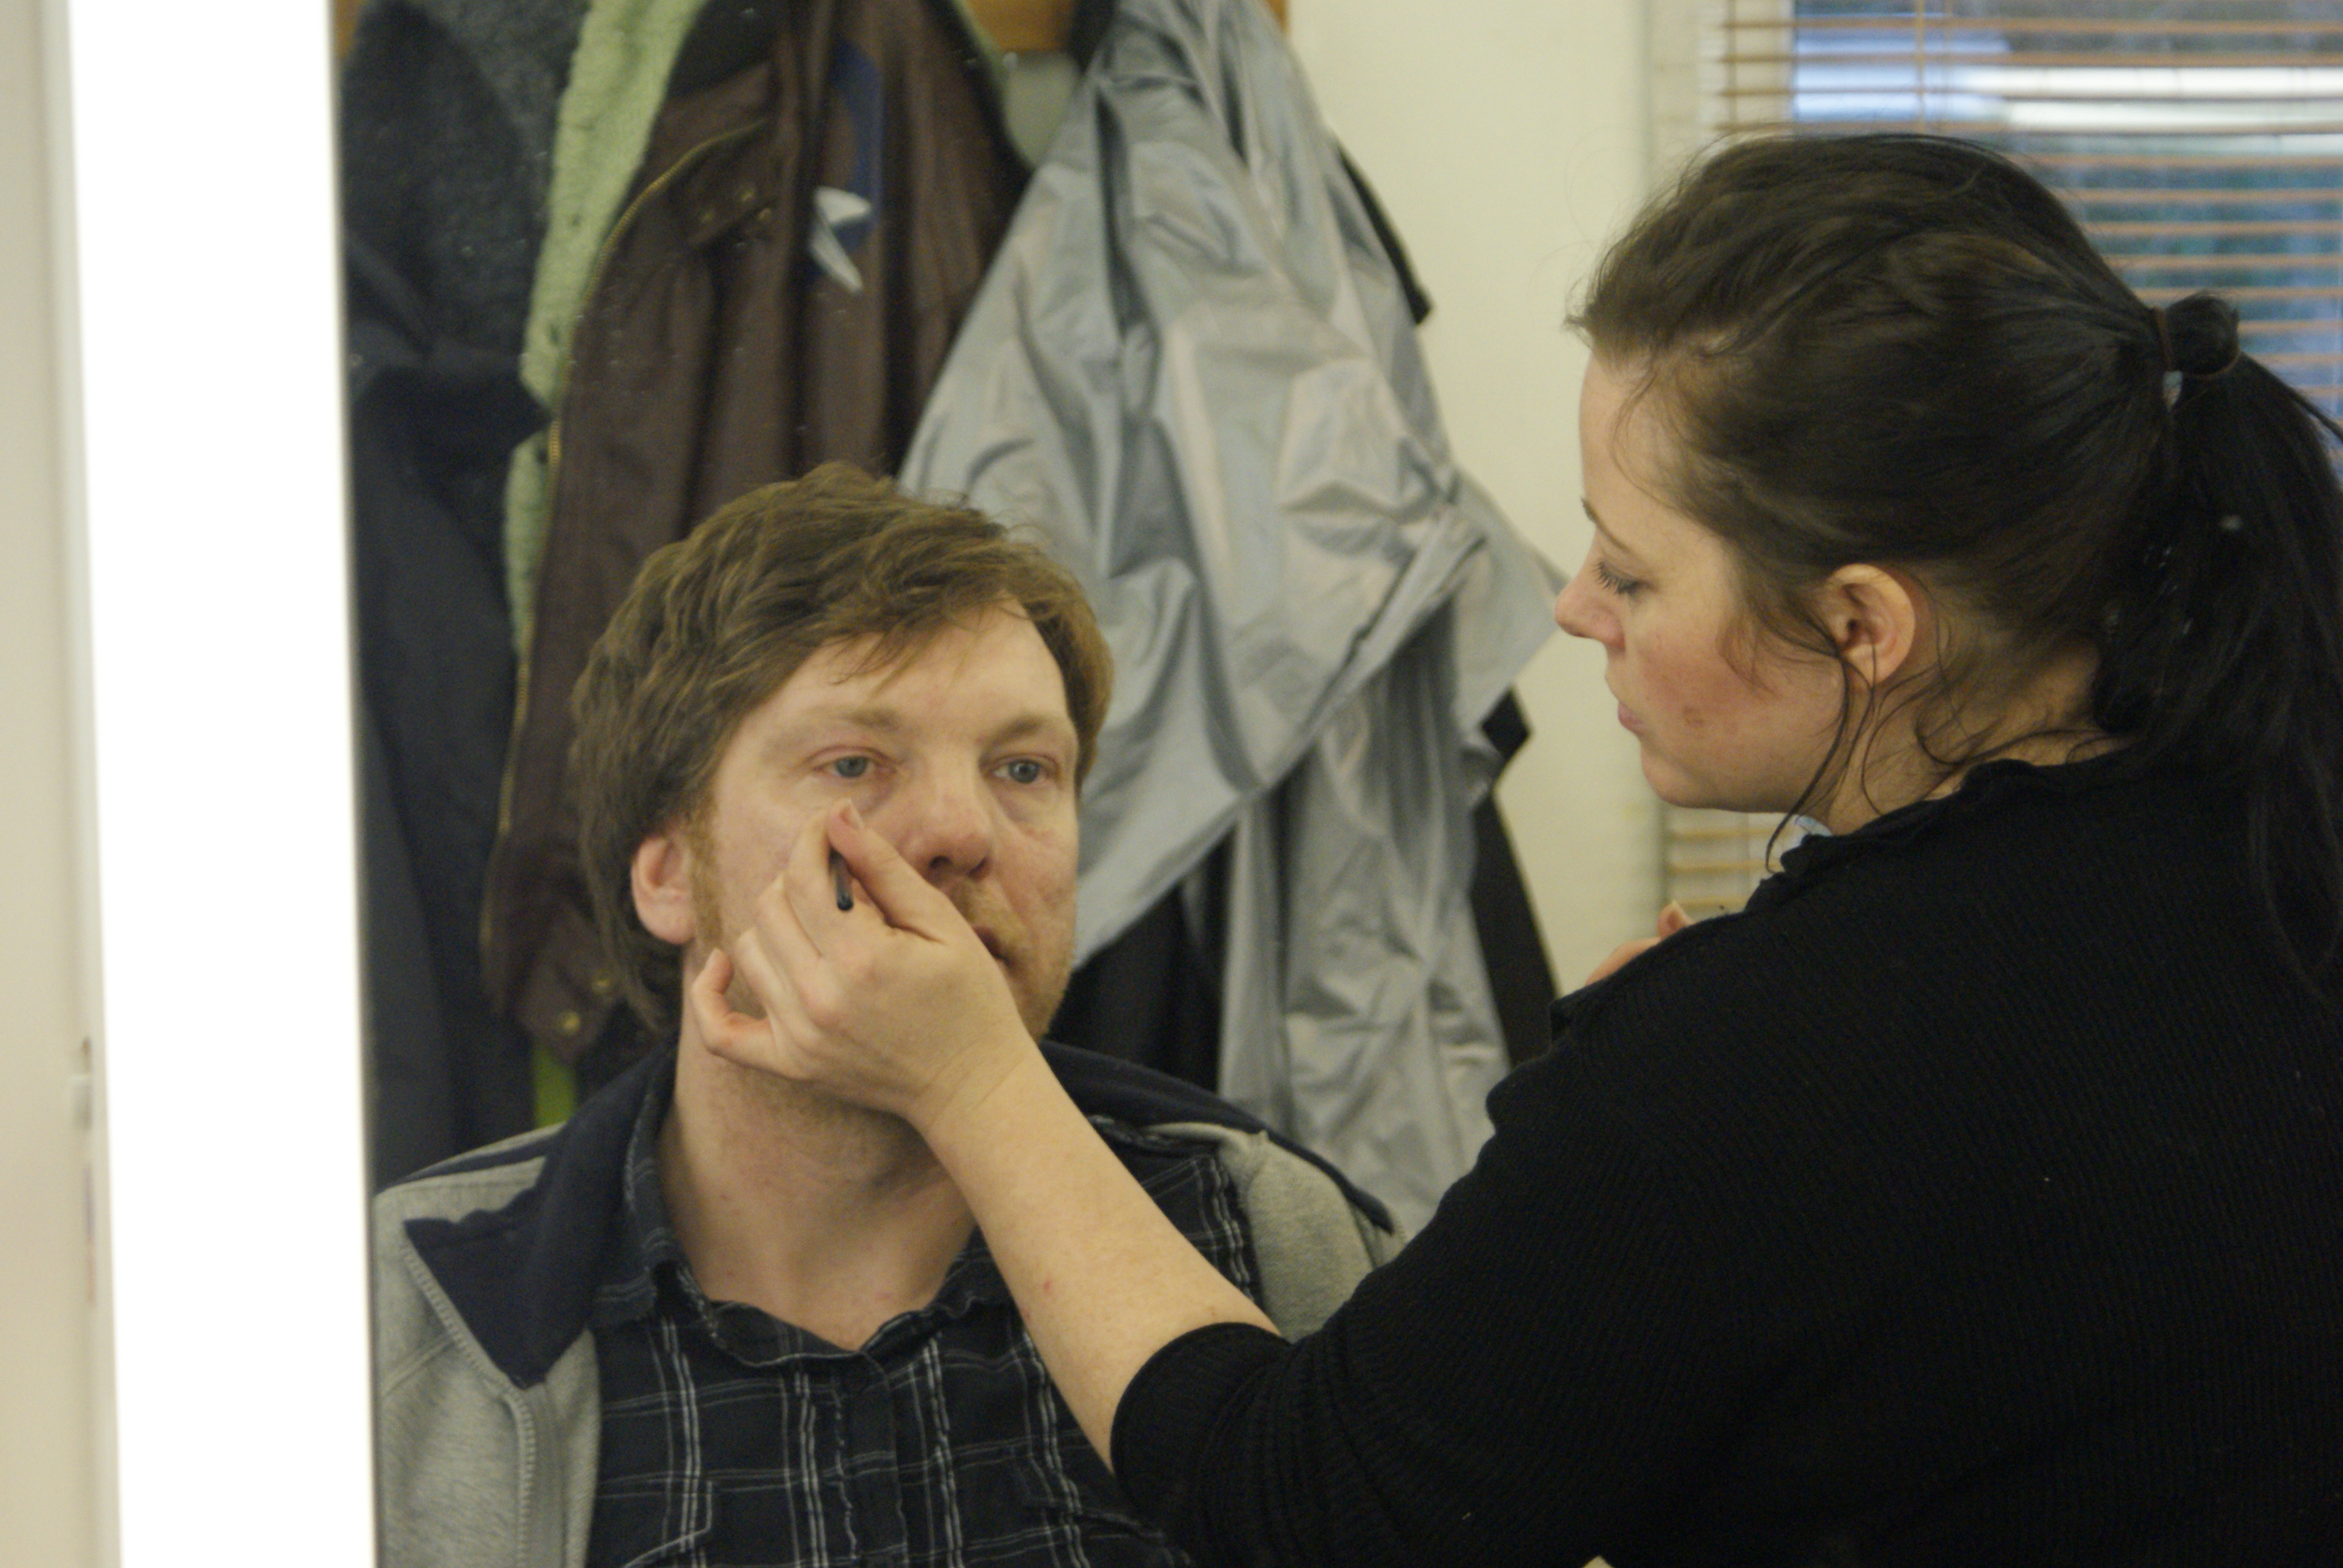 Applying makeup to Andy Tiernan (Freight, 300) March 2009